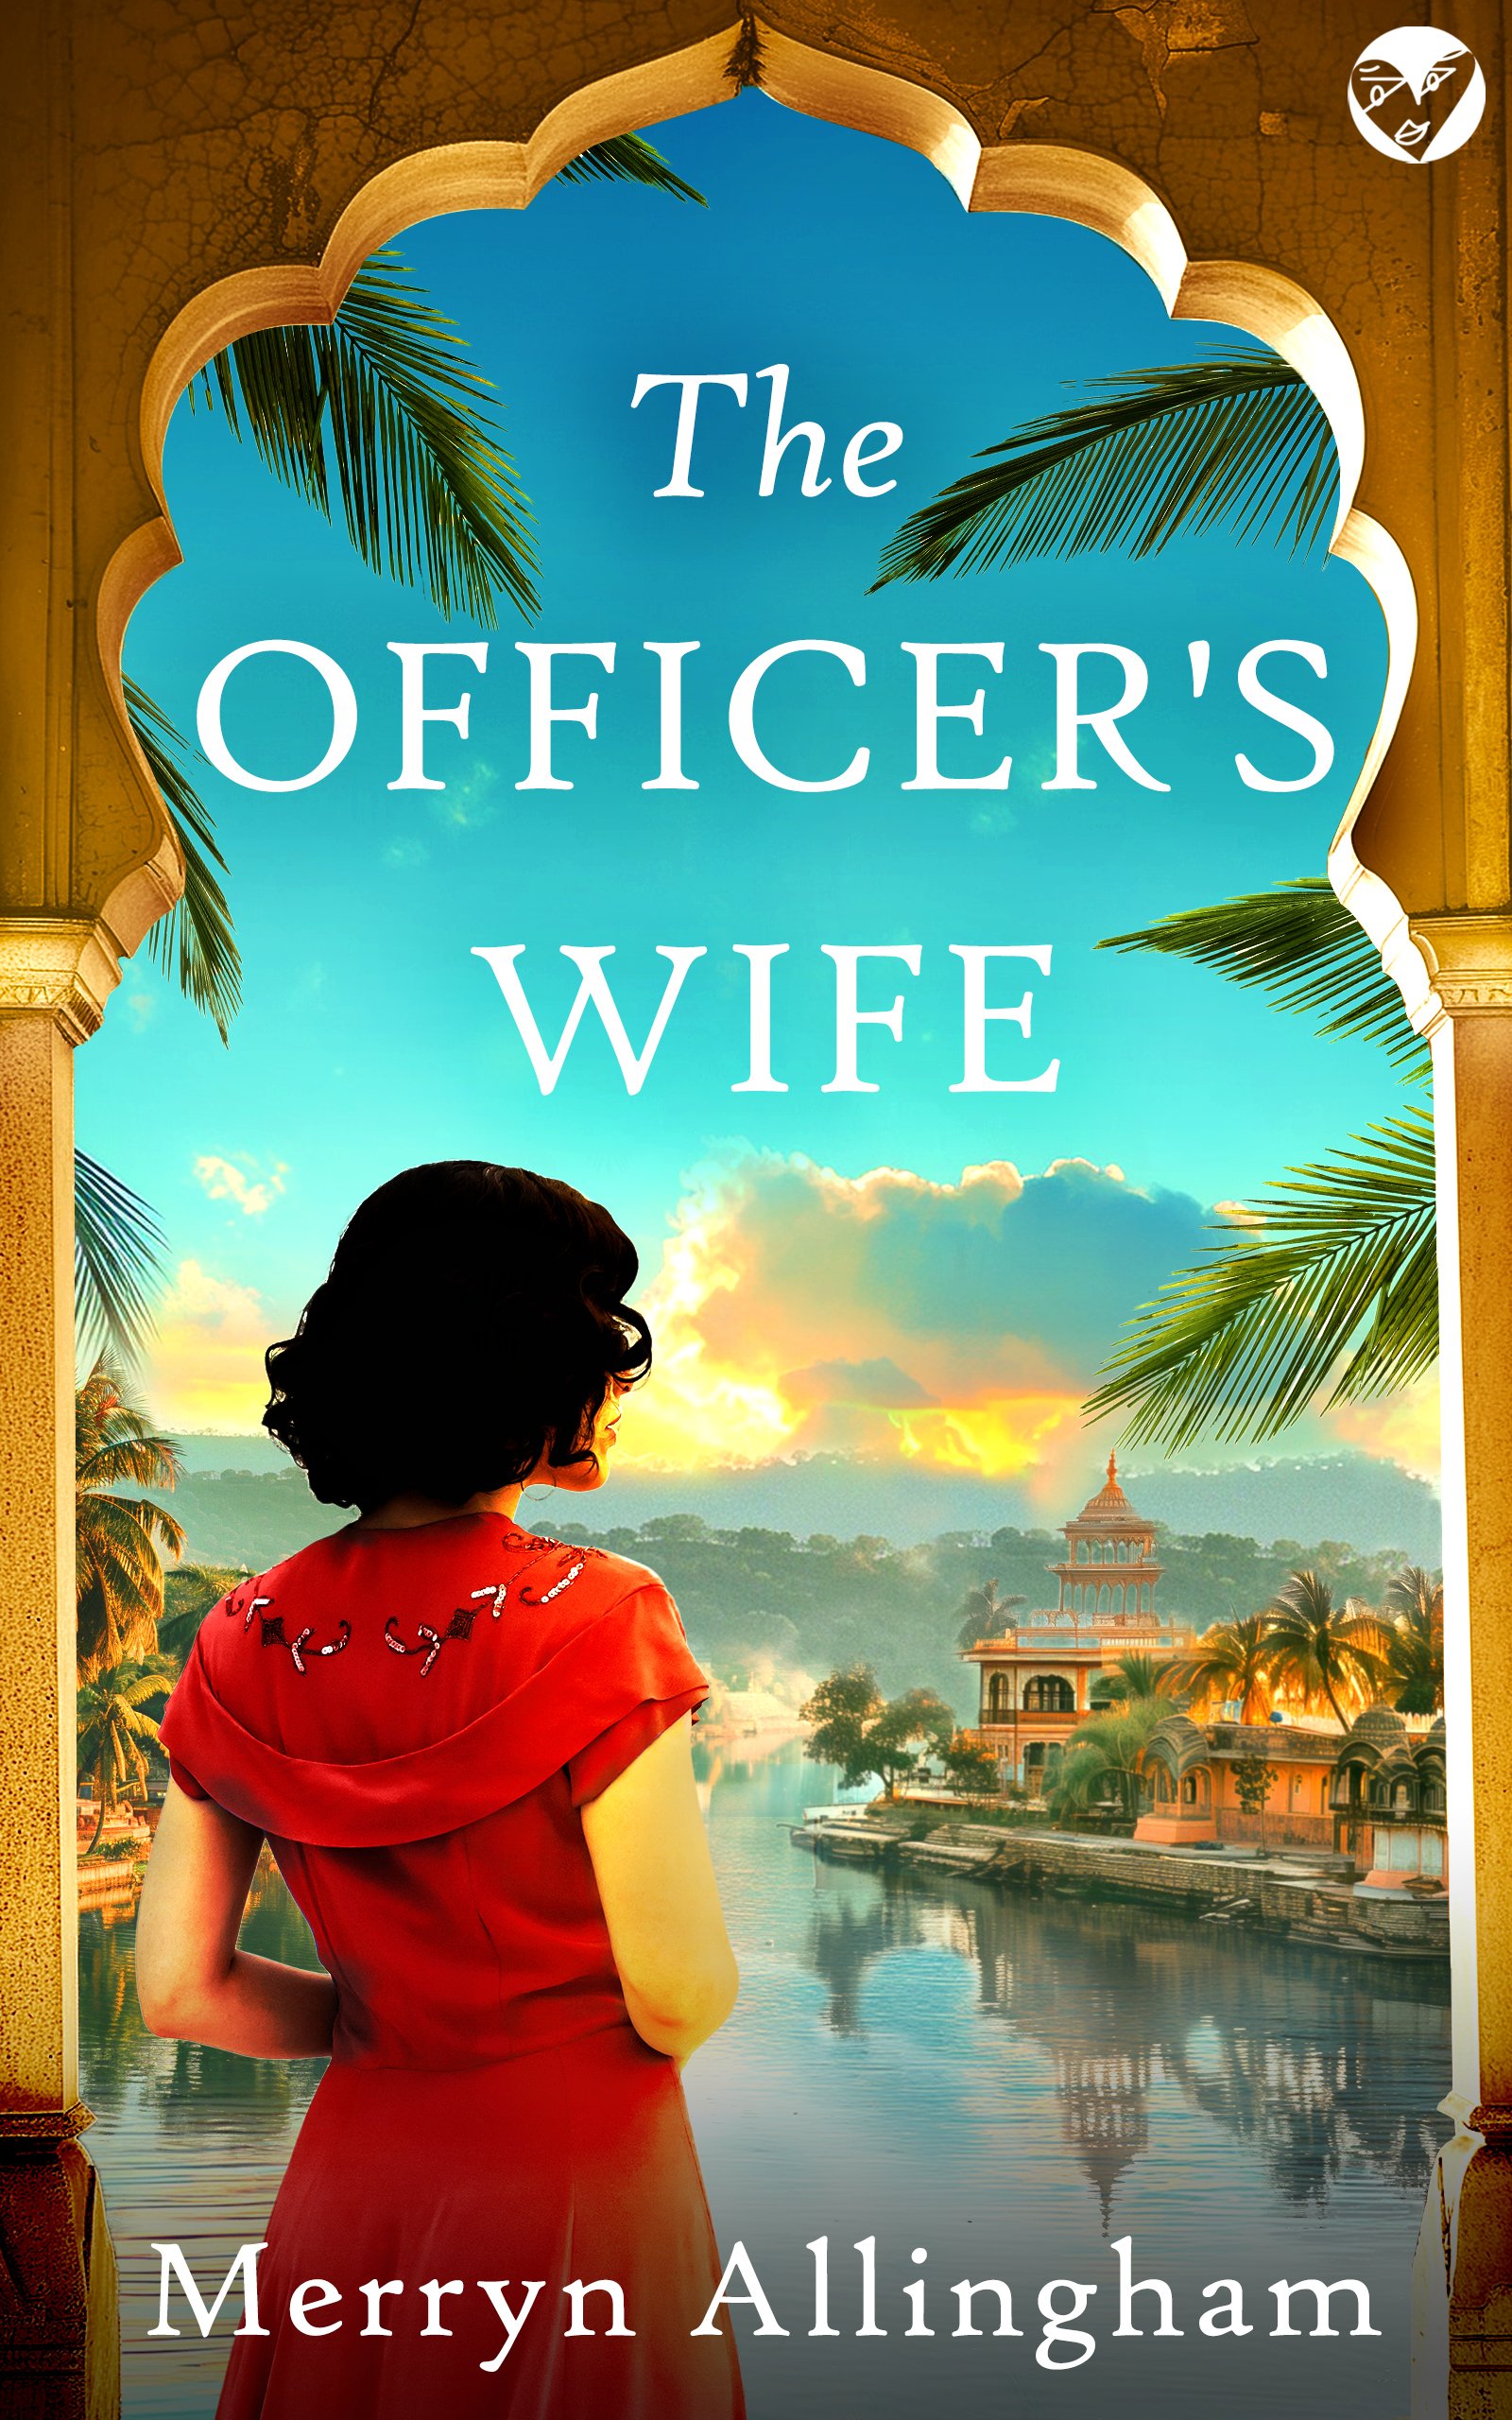 THE OFFICERS WIFE cover publish.jpg